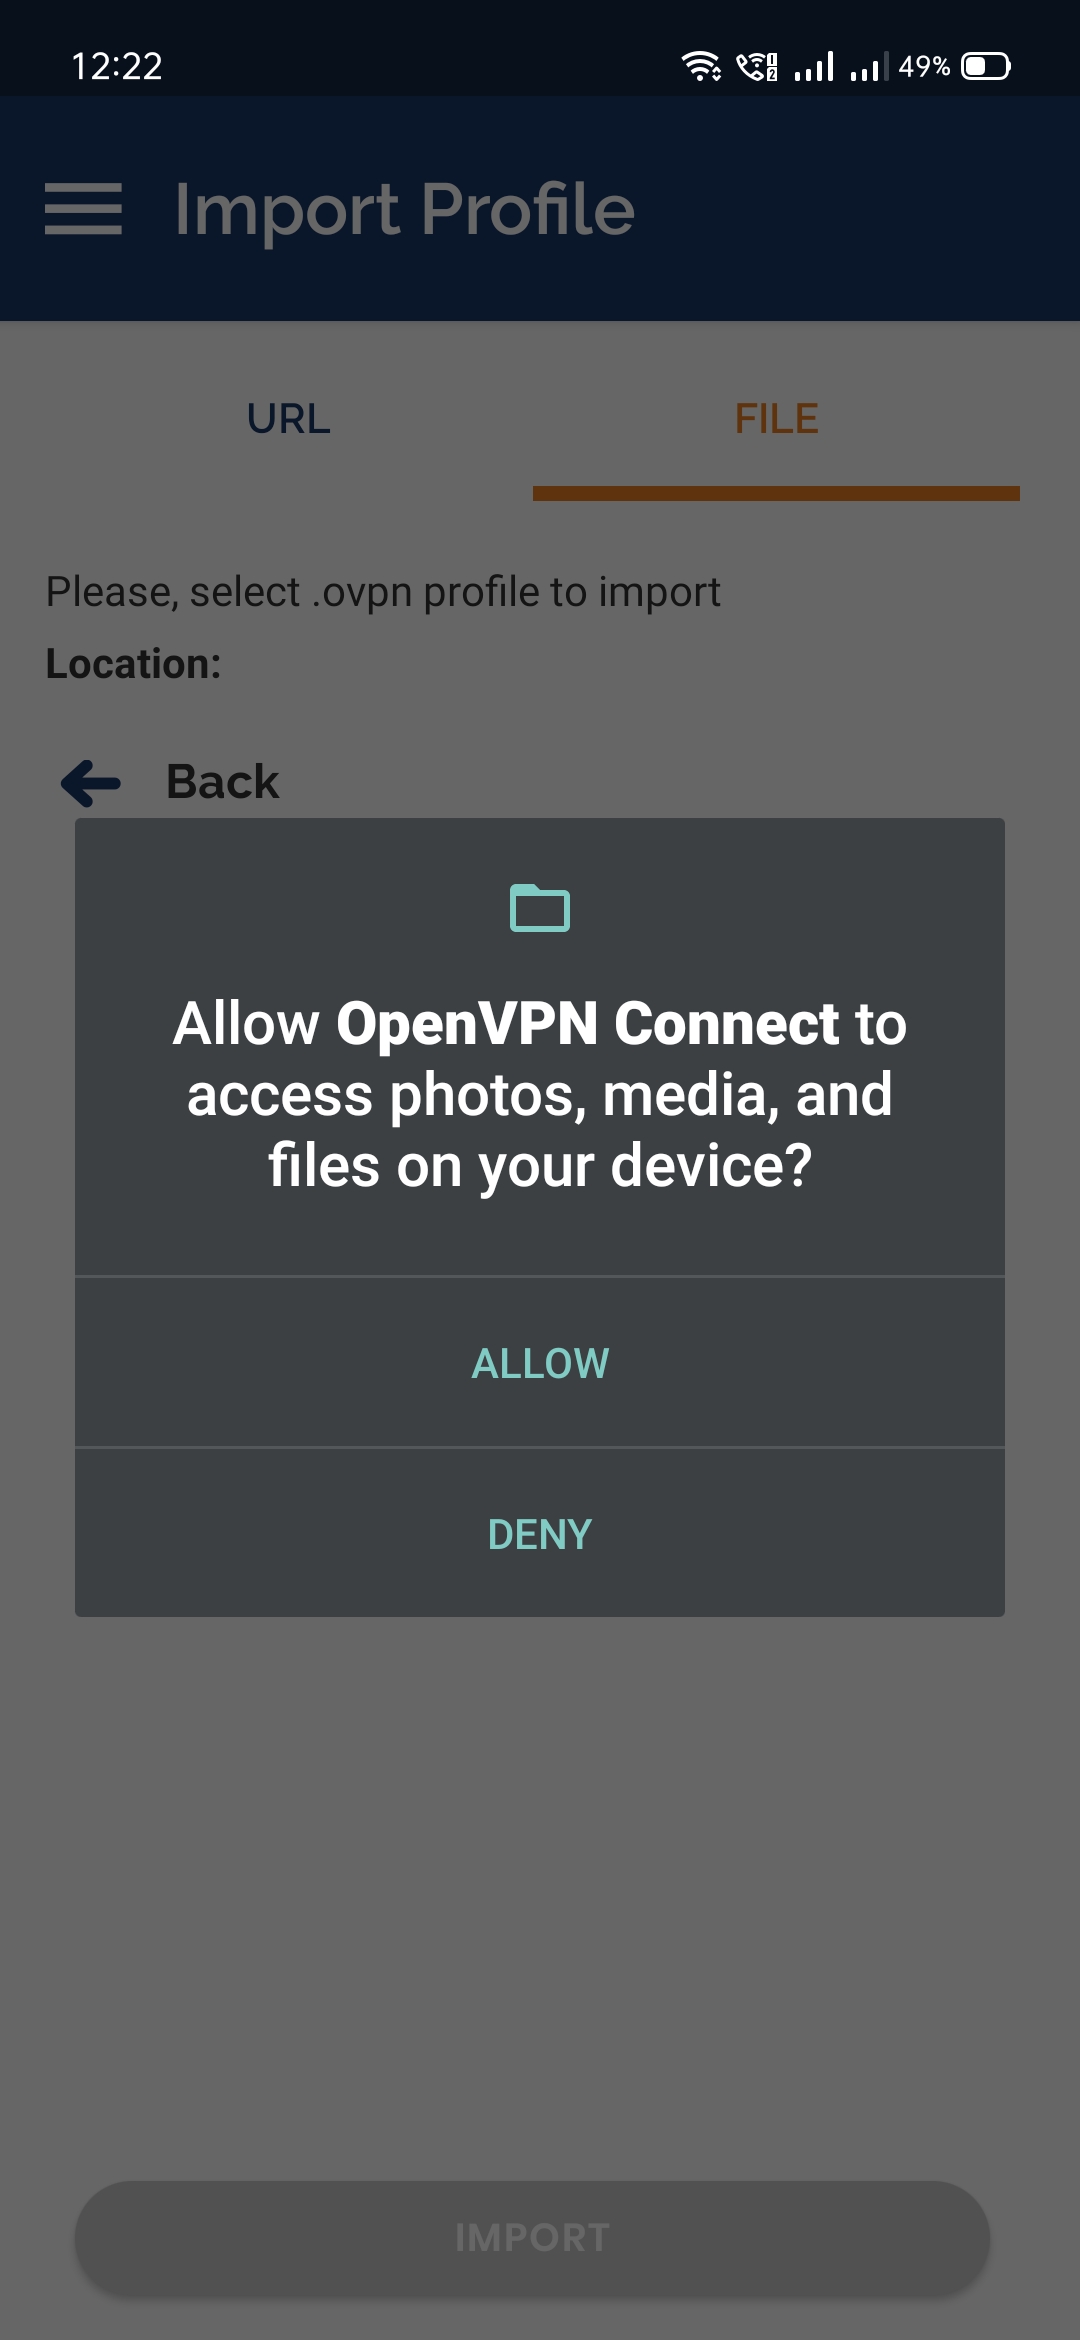 openvpn-config-android-allow-media-access.jpg